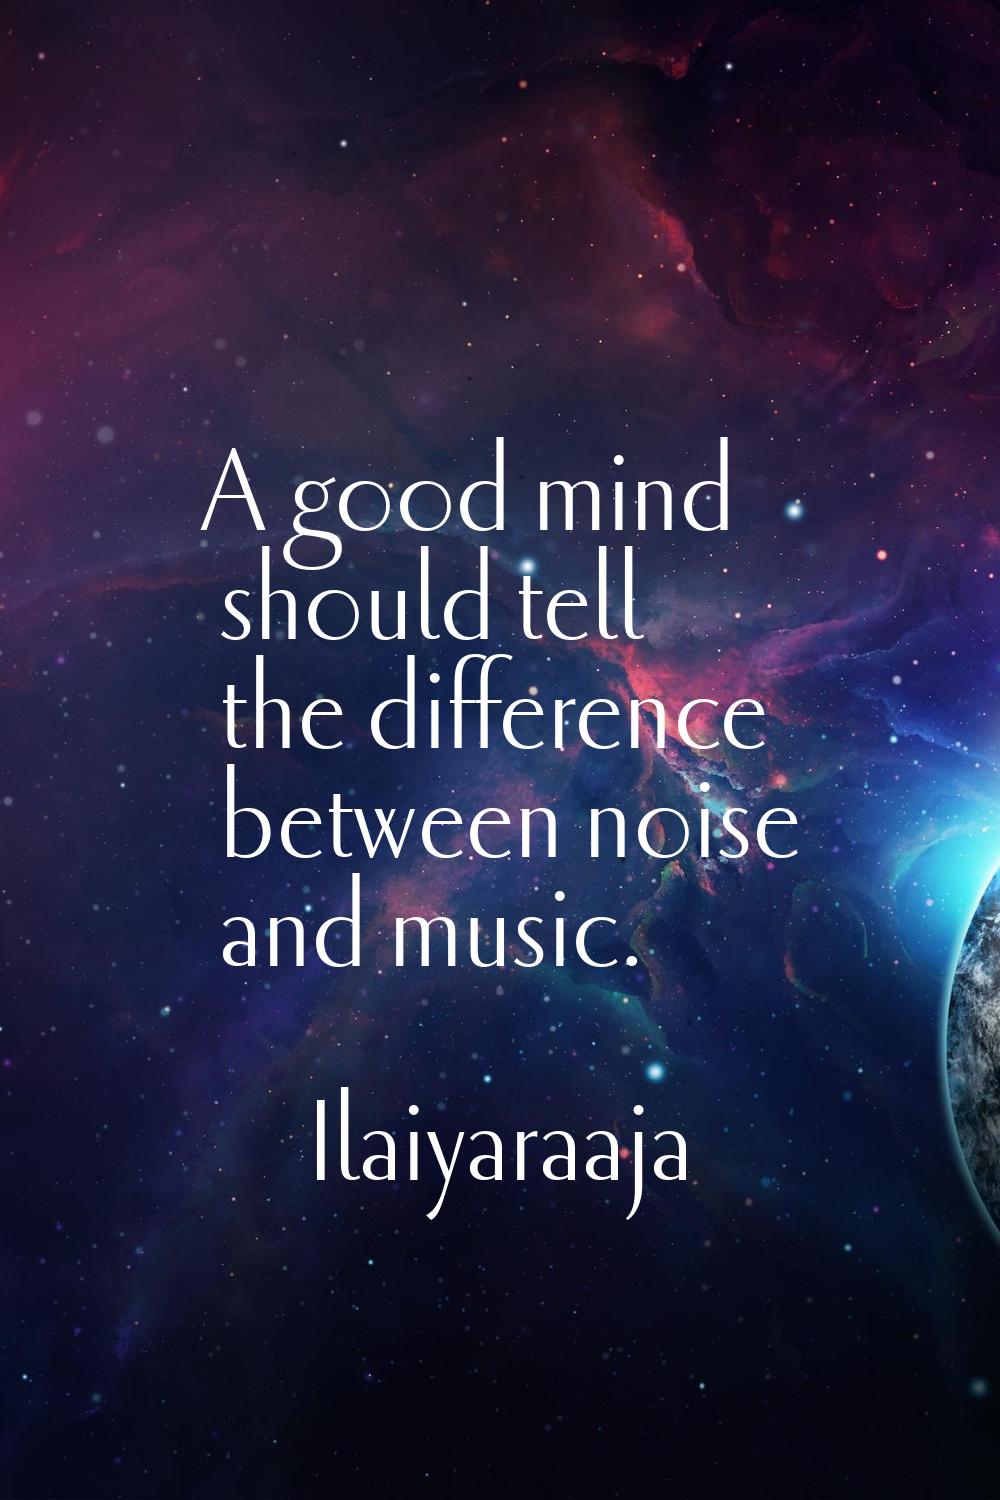 A good mind should tell the difference between noise and music.